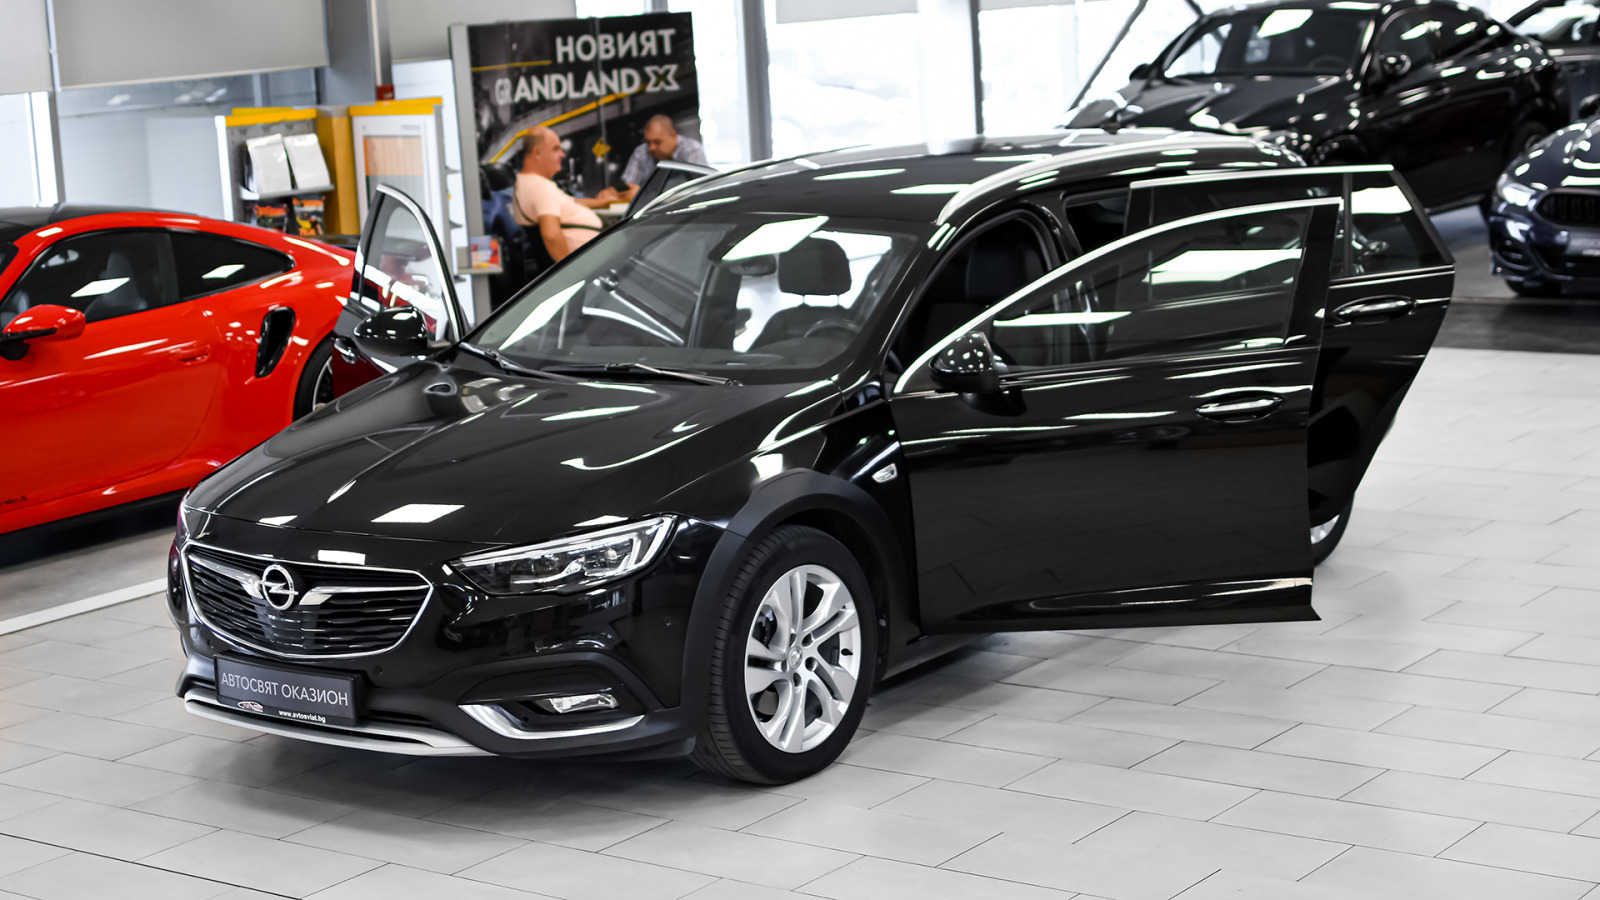 Opel Insignia Country Tourer 2.0d Automatic - изображение 1